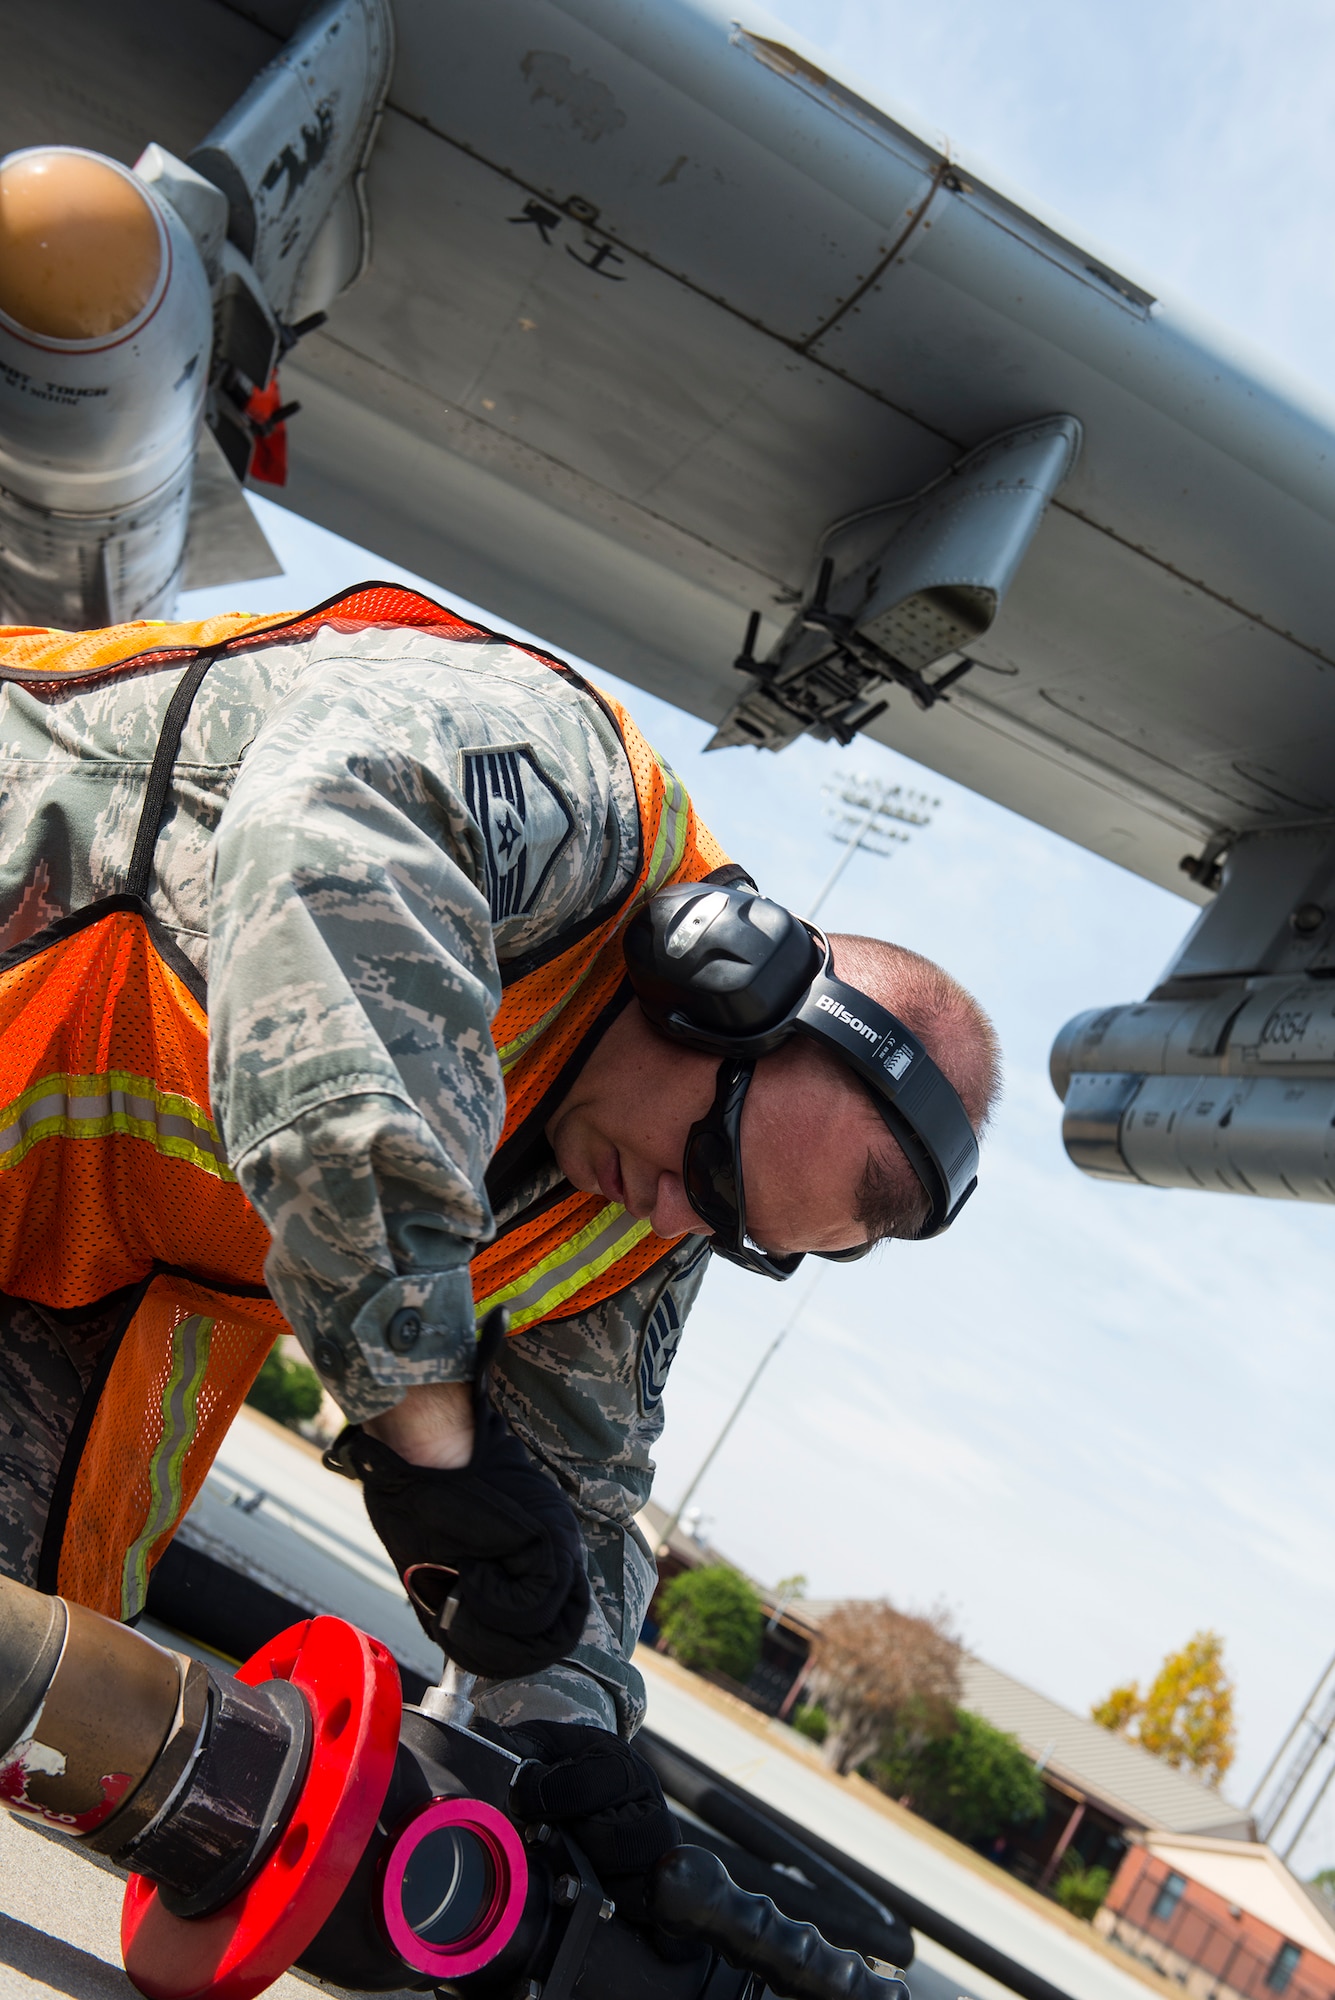 U.S. Air Force Master Sgt. Michael Dunblazier, 23d Logistics Readiness Squadron operations section chief, tightens a strainer during the “Walk a Day in My Shoes” fundraiser Nov. 13, 2014, at Moody Air Force Base, Ga. Dunblazier traded his office job to refuel aircraft on the flightline as a fuels distribution operator. (U.S. Air Force photo by Airman 1st Class Ceaira Tinsley/Released)